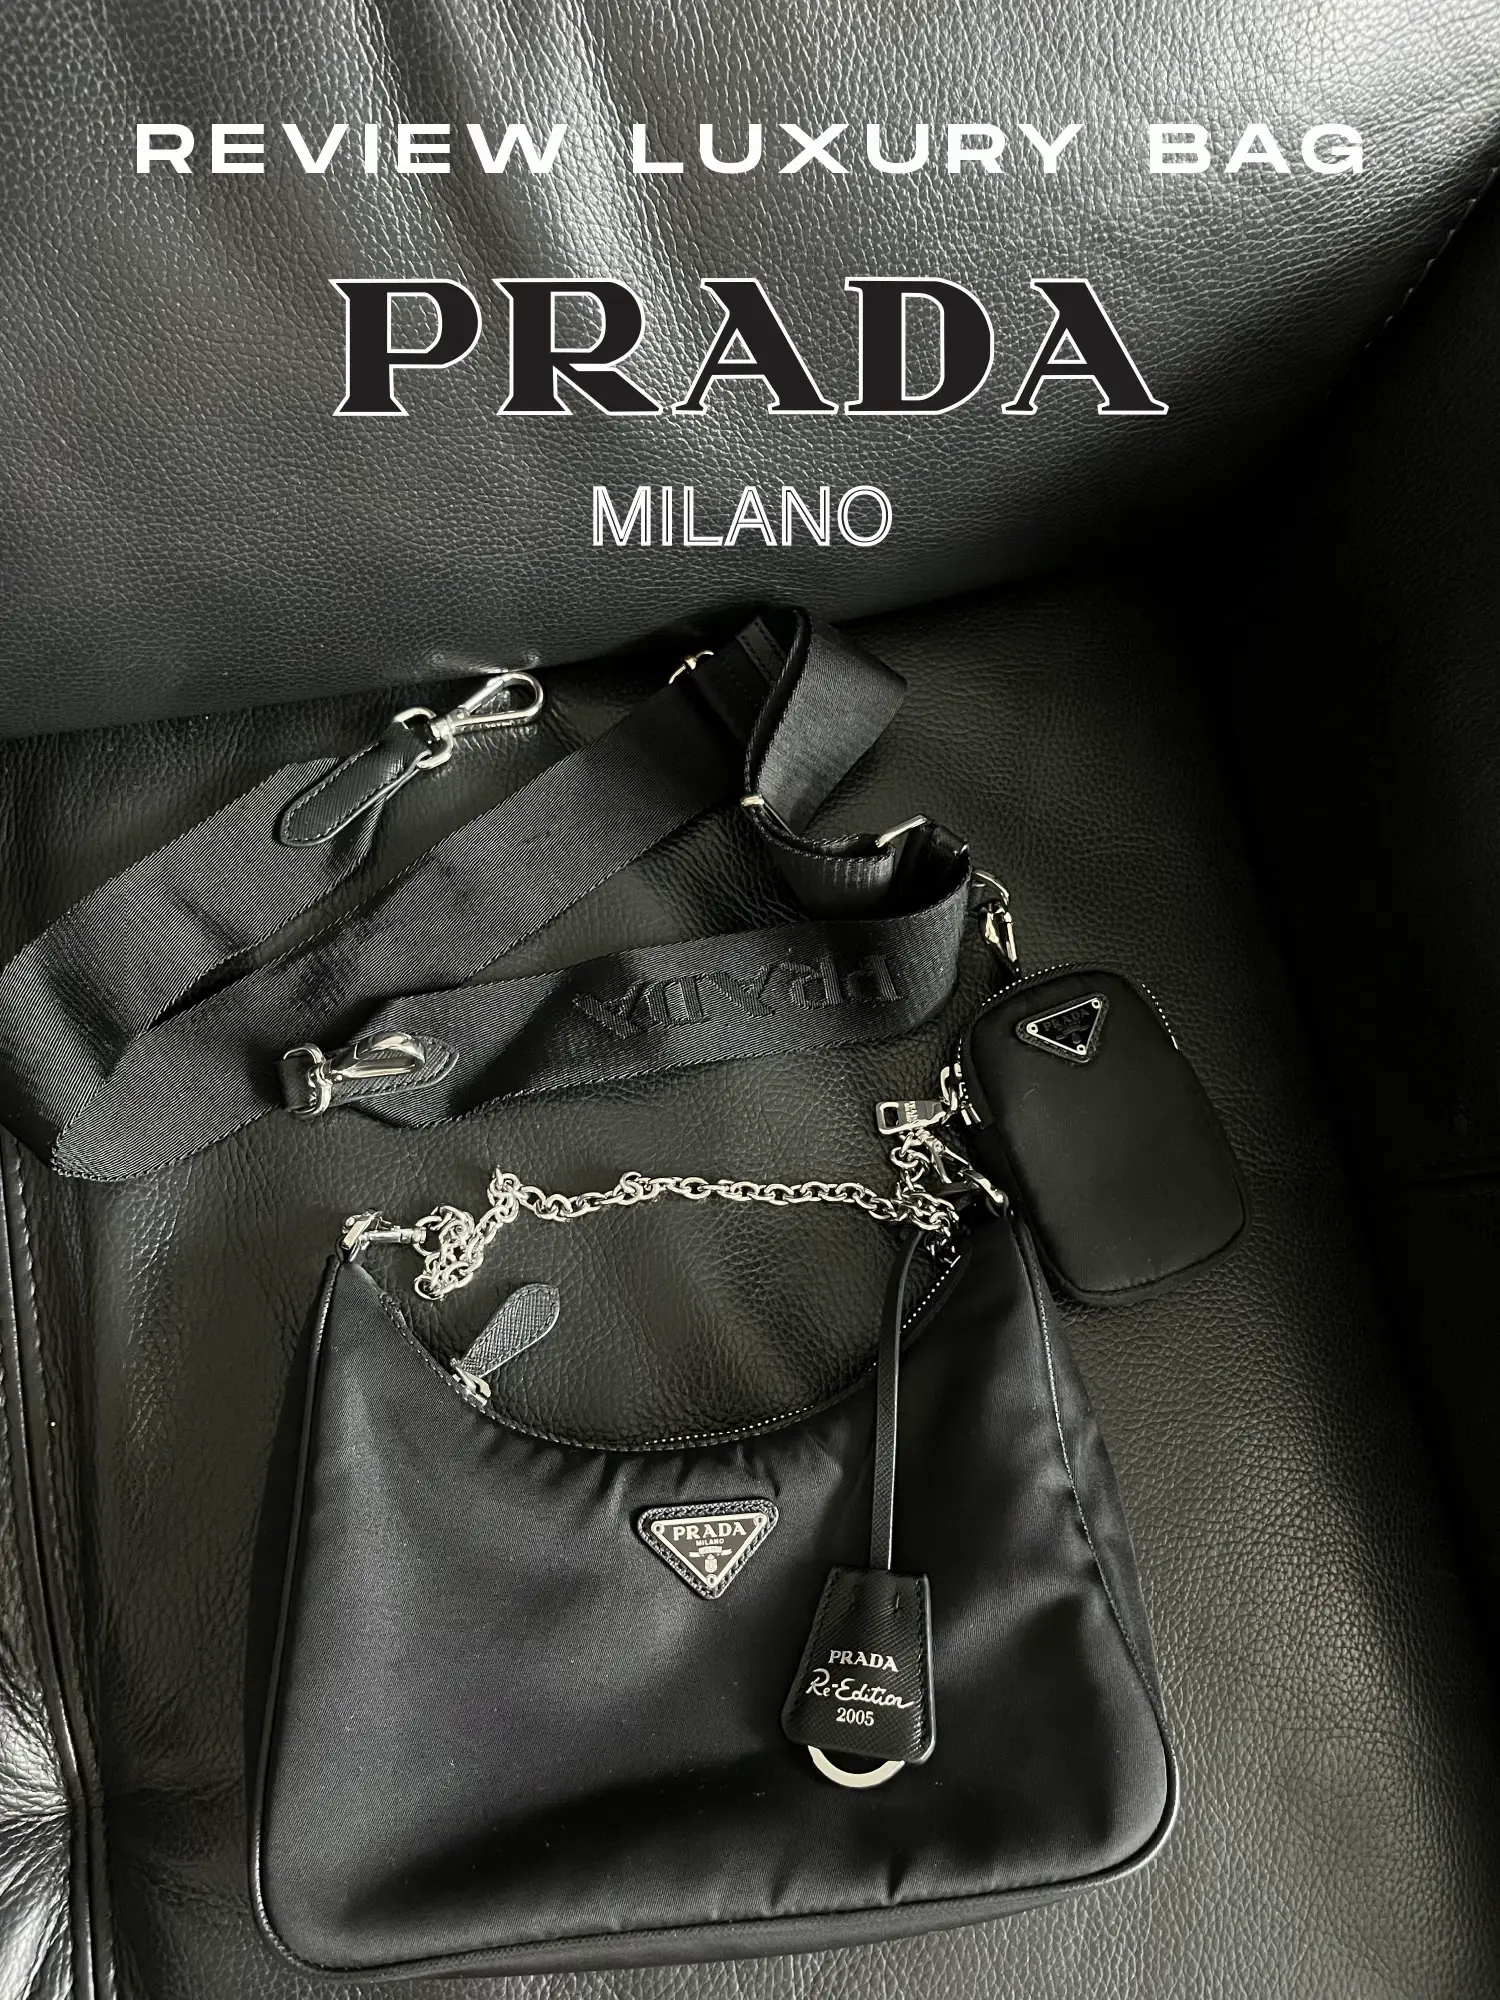 PRADA RE-EDITION 2005 NYLON MINI BAG REVIEW +UNBOXING+WHAT FITS INSIDE 